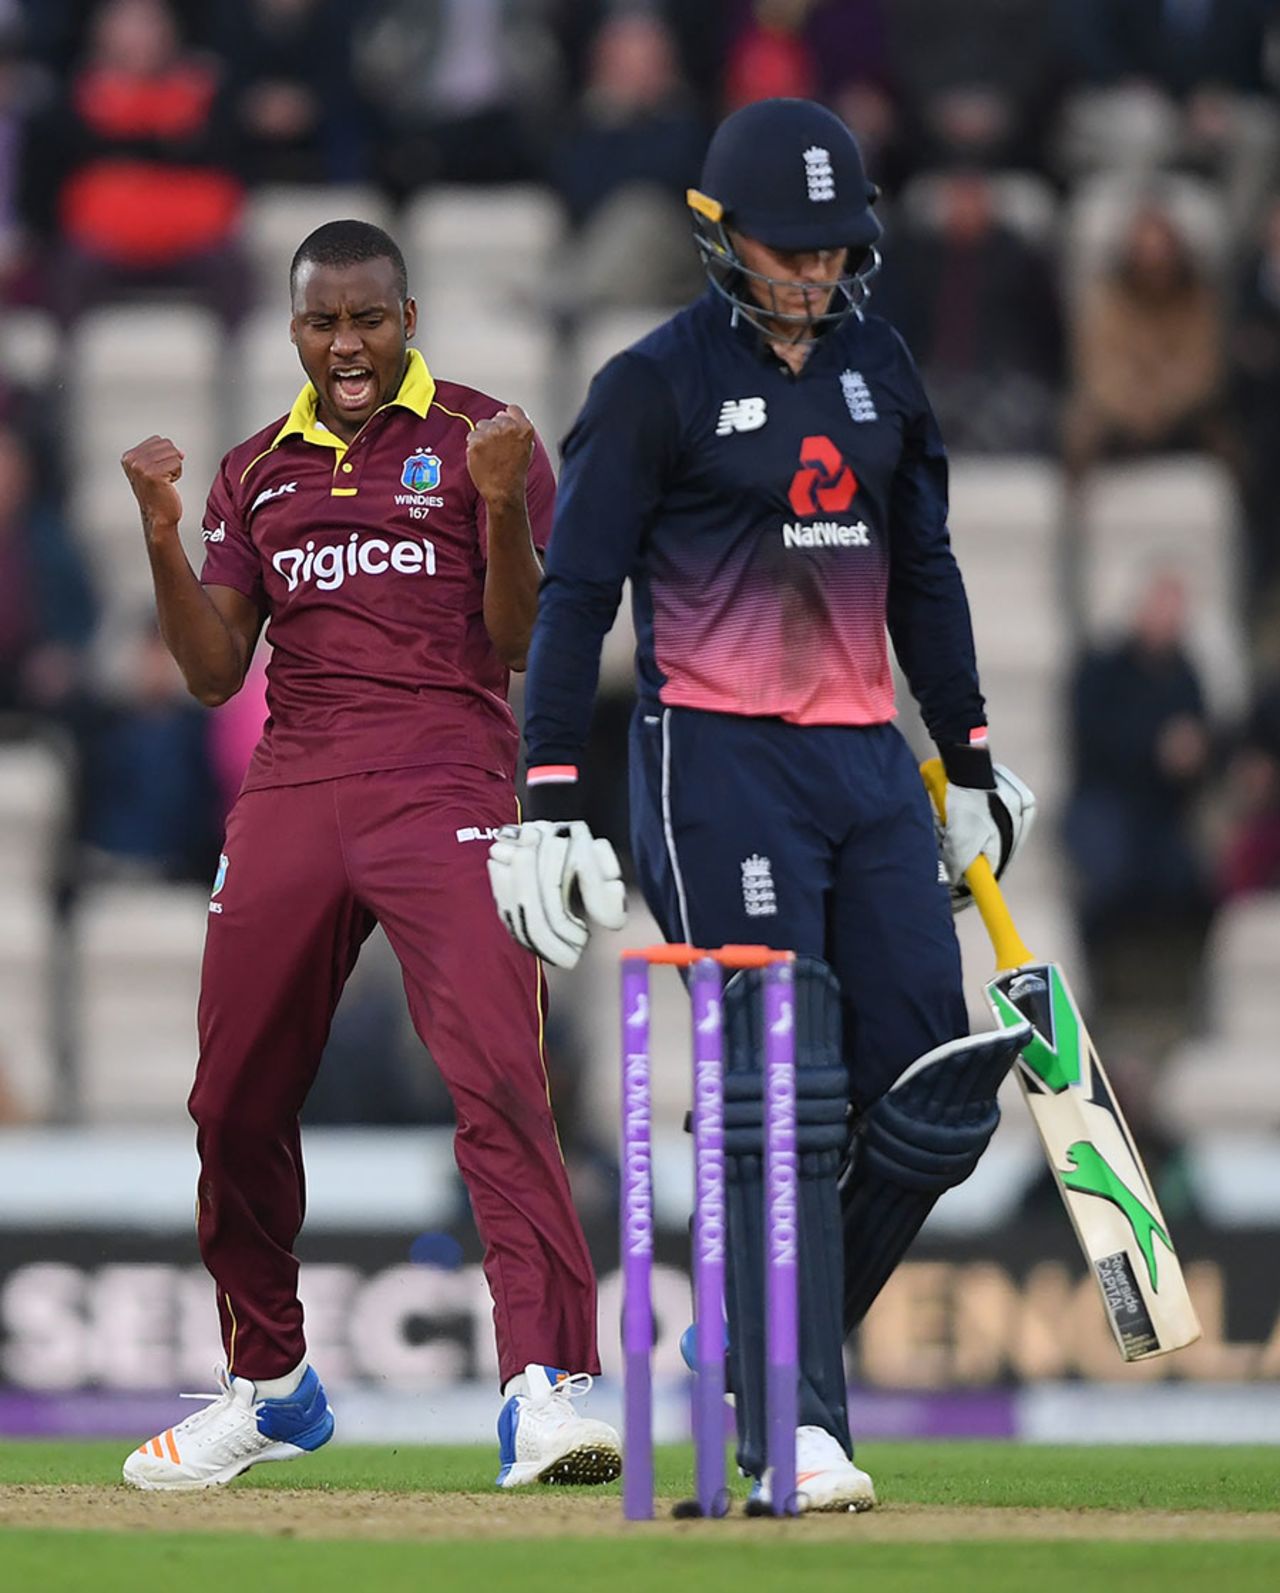 Miguel Cummins removed Jason Roy just short of a century, England v West Indies, 5th ODI, Ageas Bowl, September 29, 2017